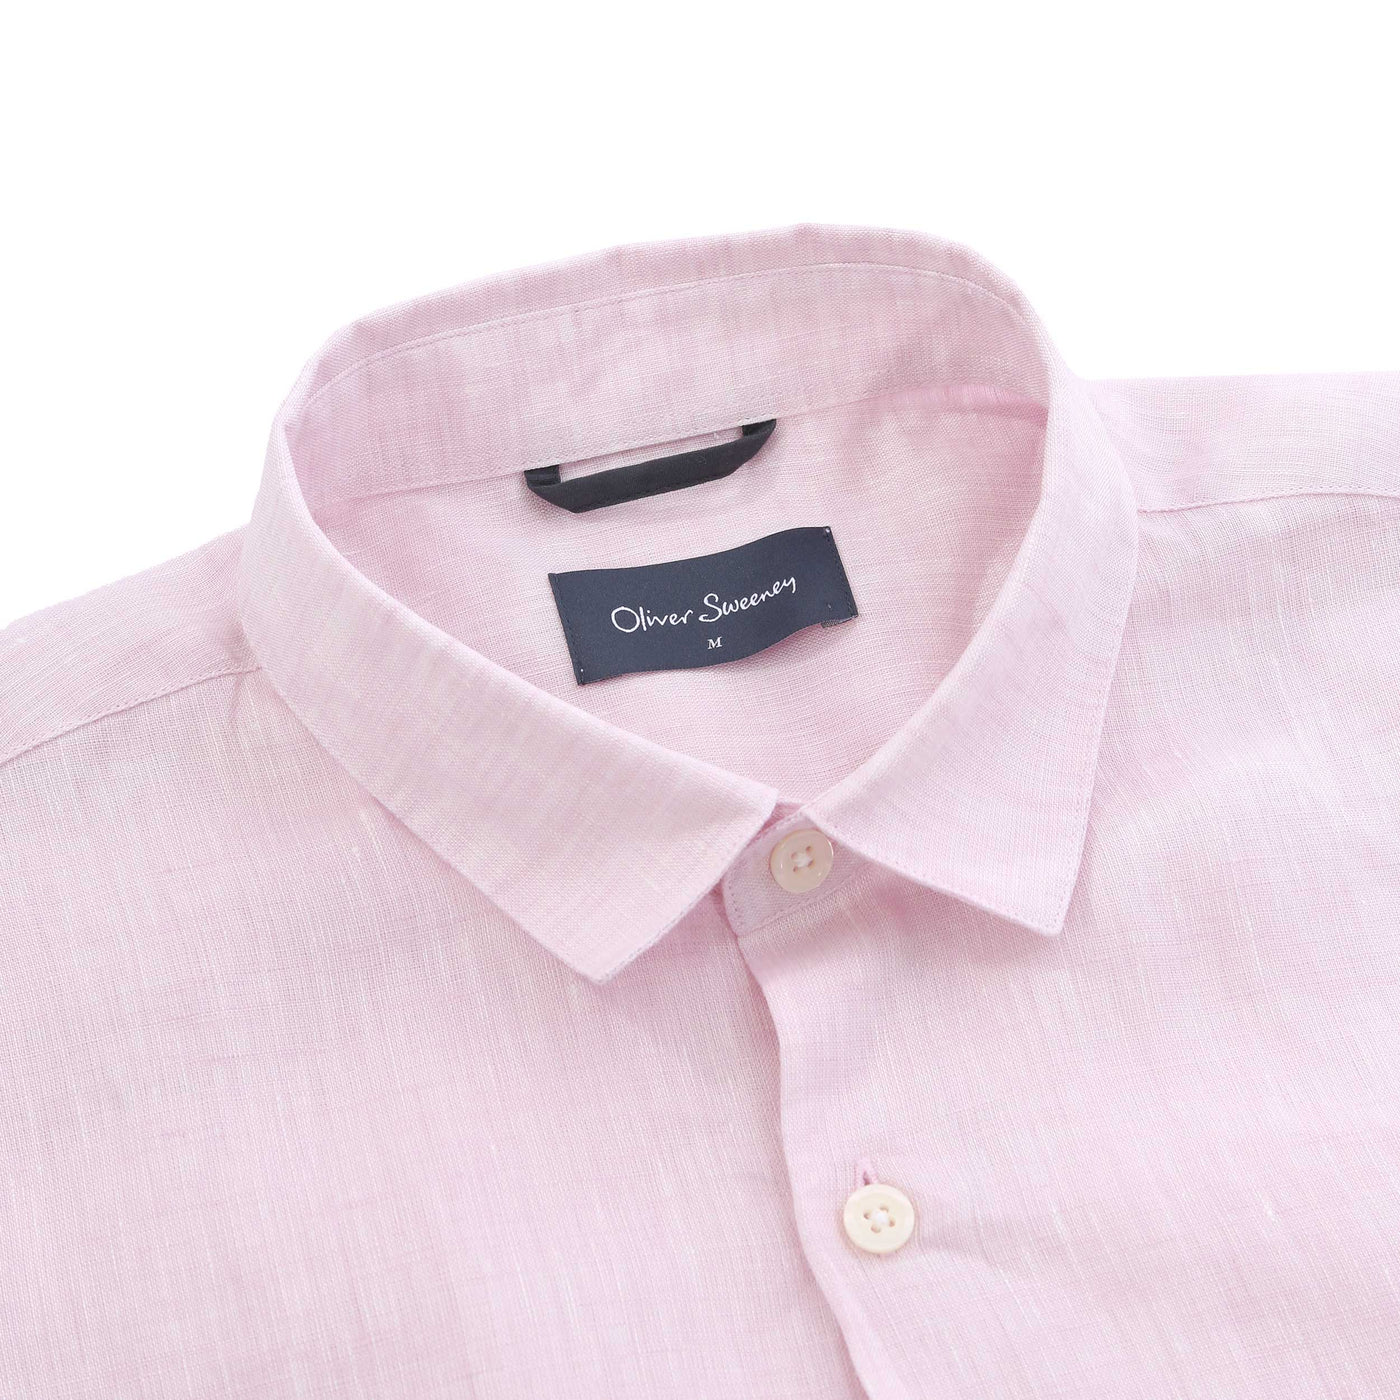 Oliver Sweeney Eakring SS Shirt in Pink Collar